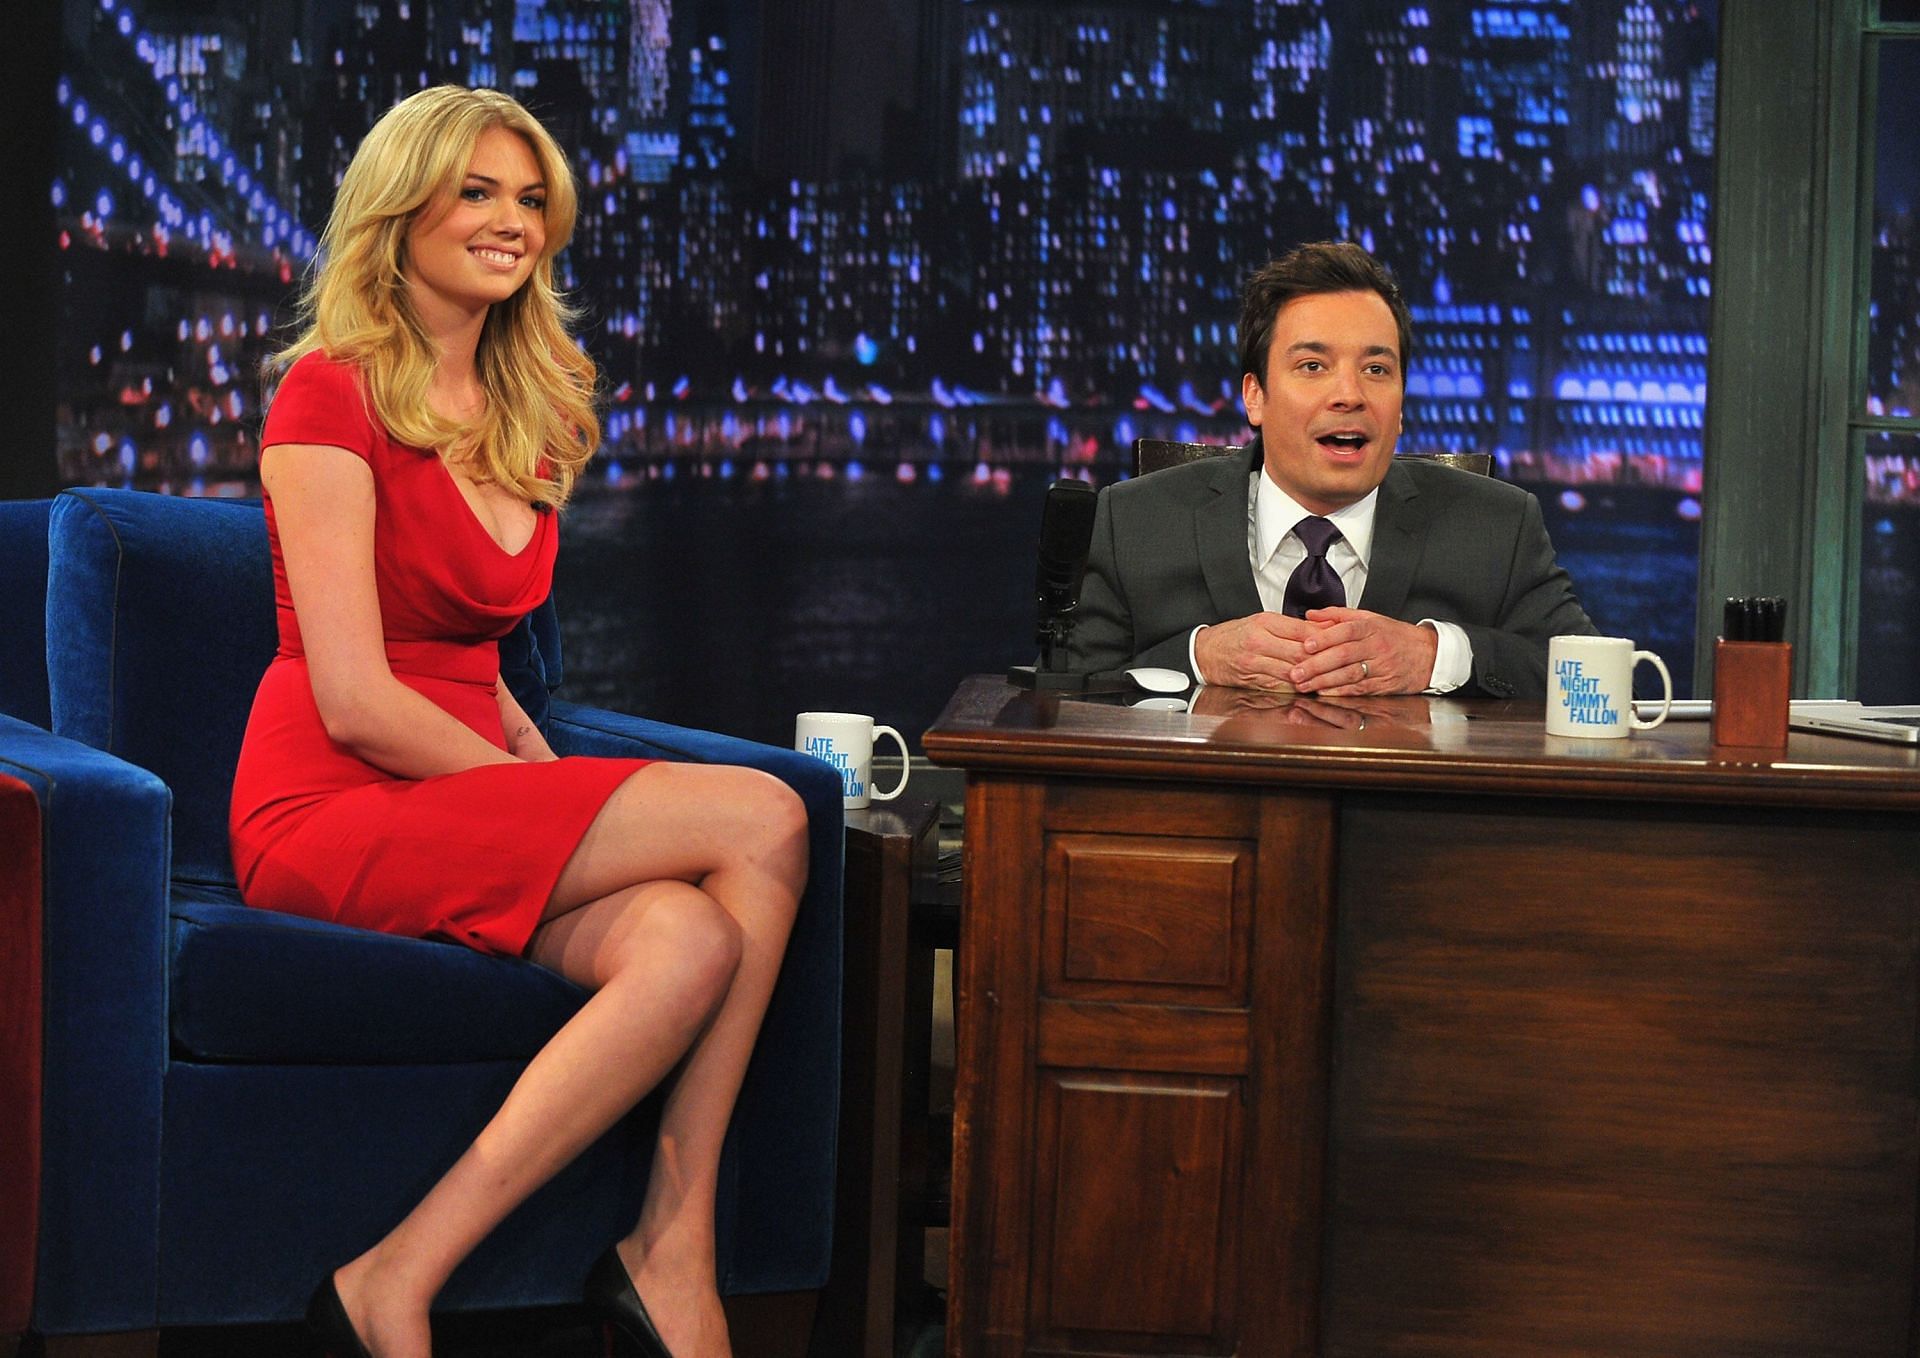 Kate Upton Visits &quot;Late Night With Jimmy Fallon&quot;